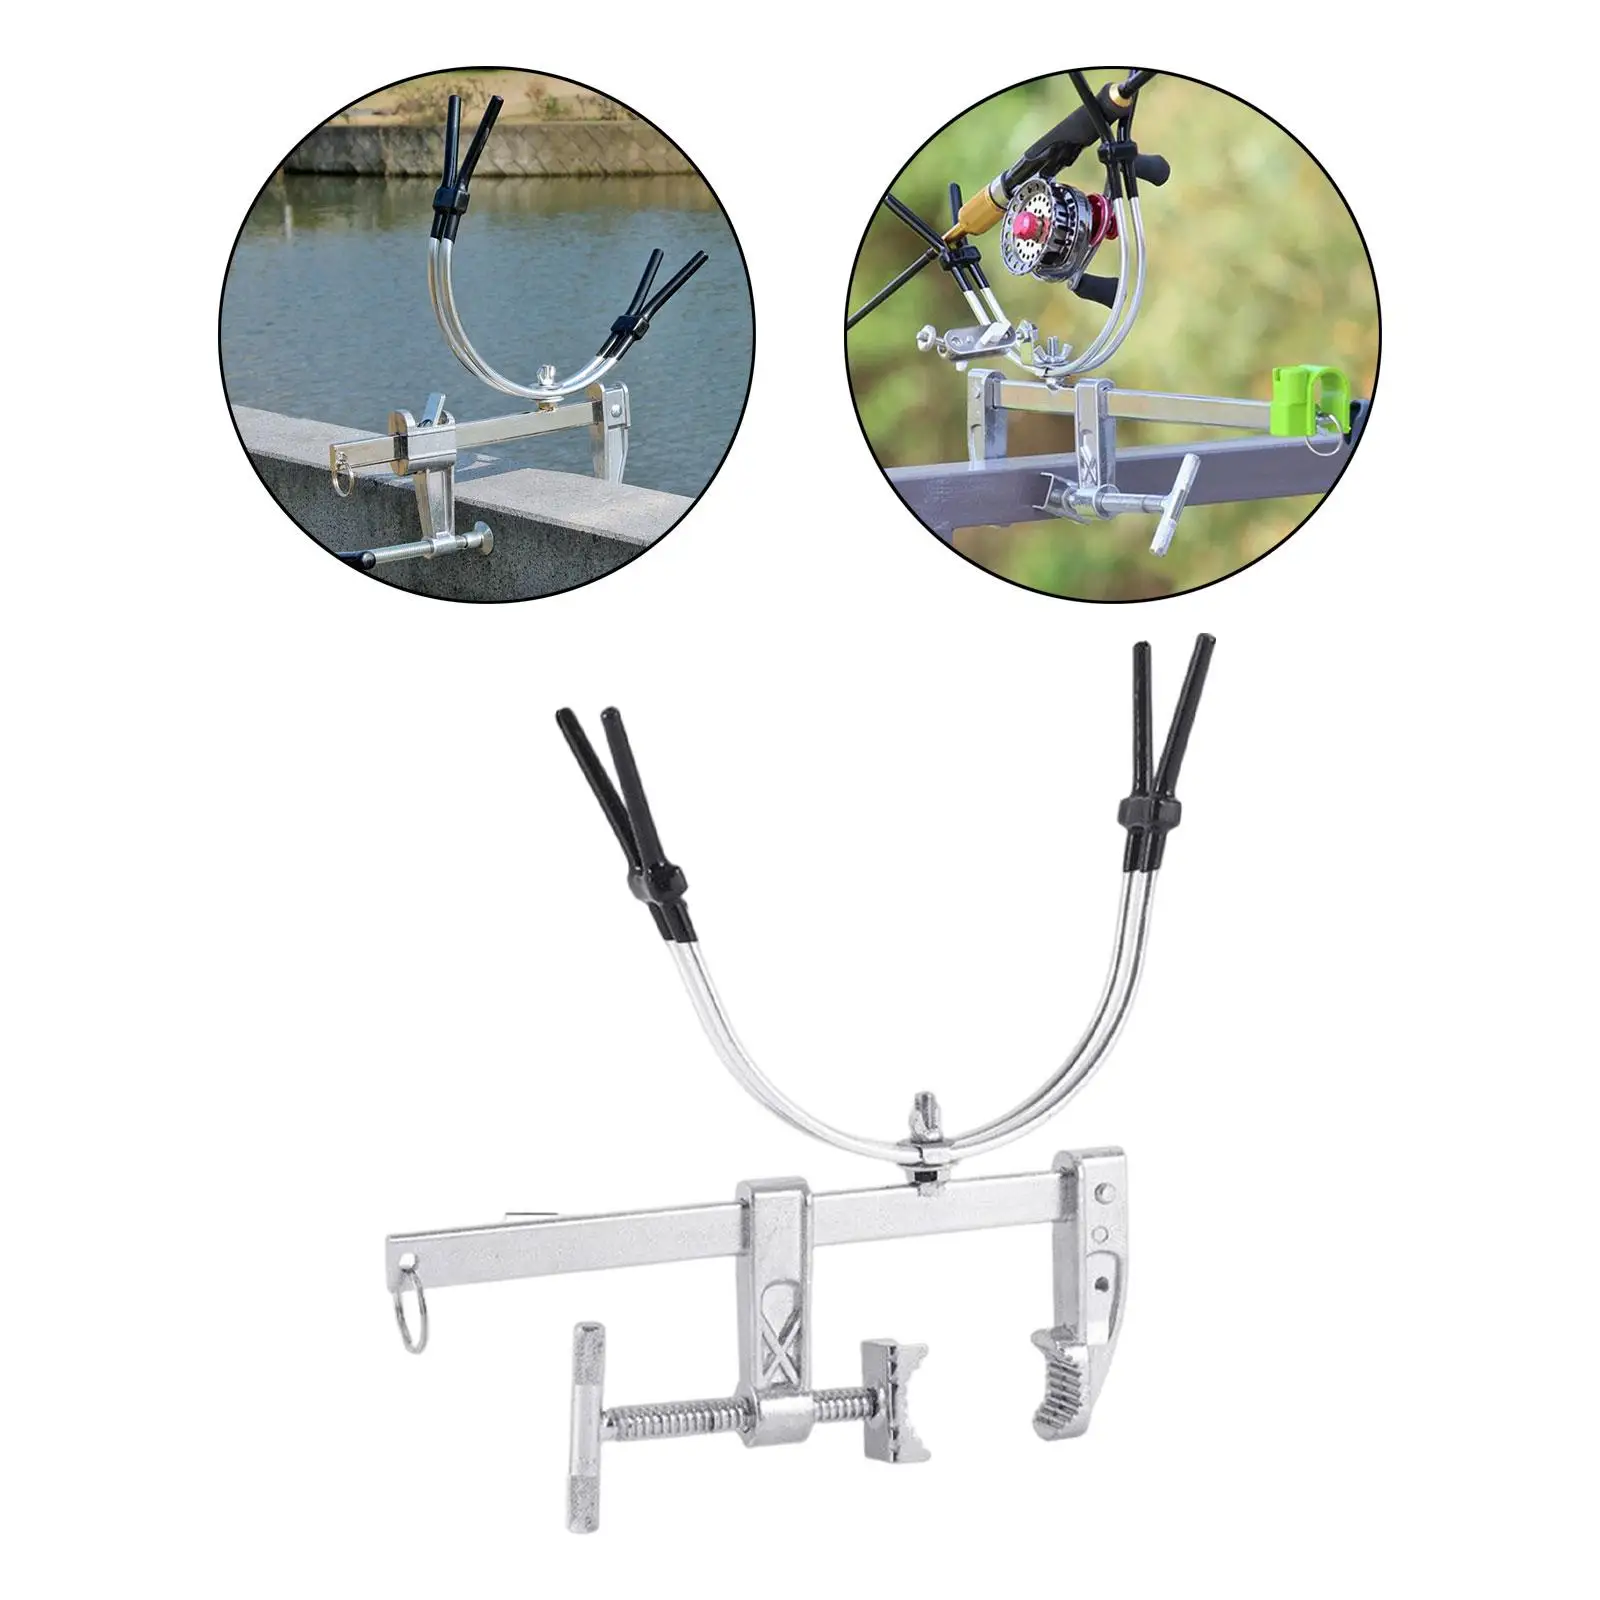 U Shaped Fishing Bracket Fishing Gear Support Stand Stable Multi Directional